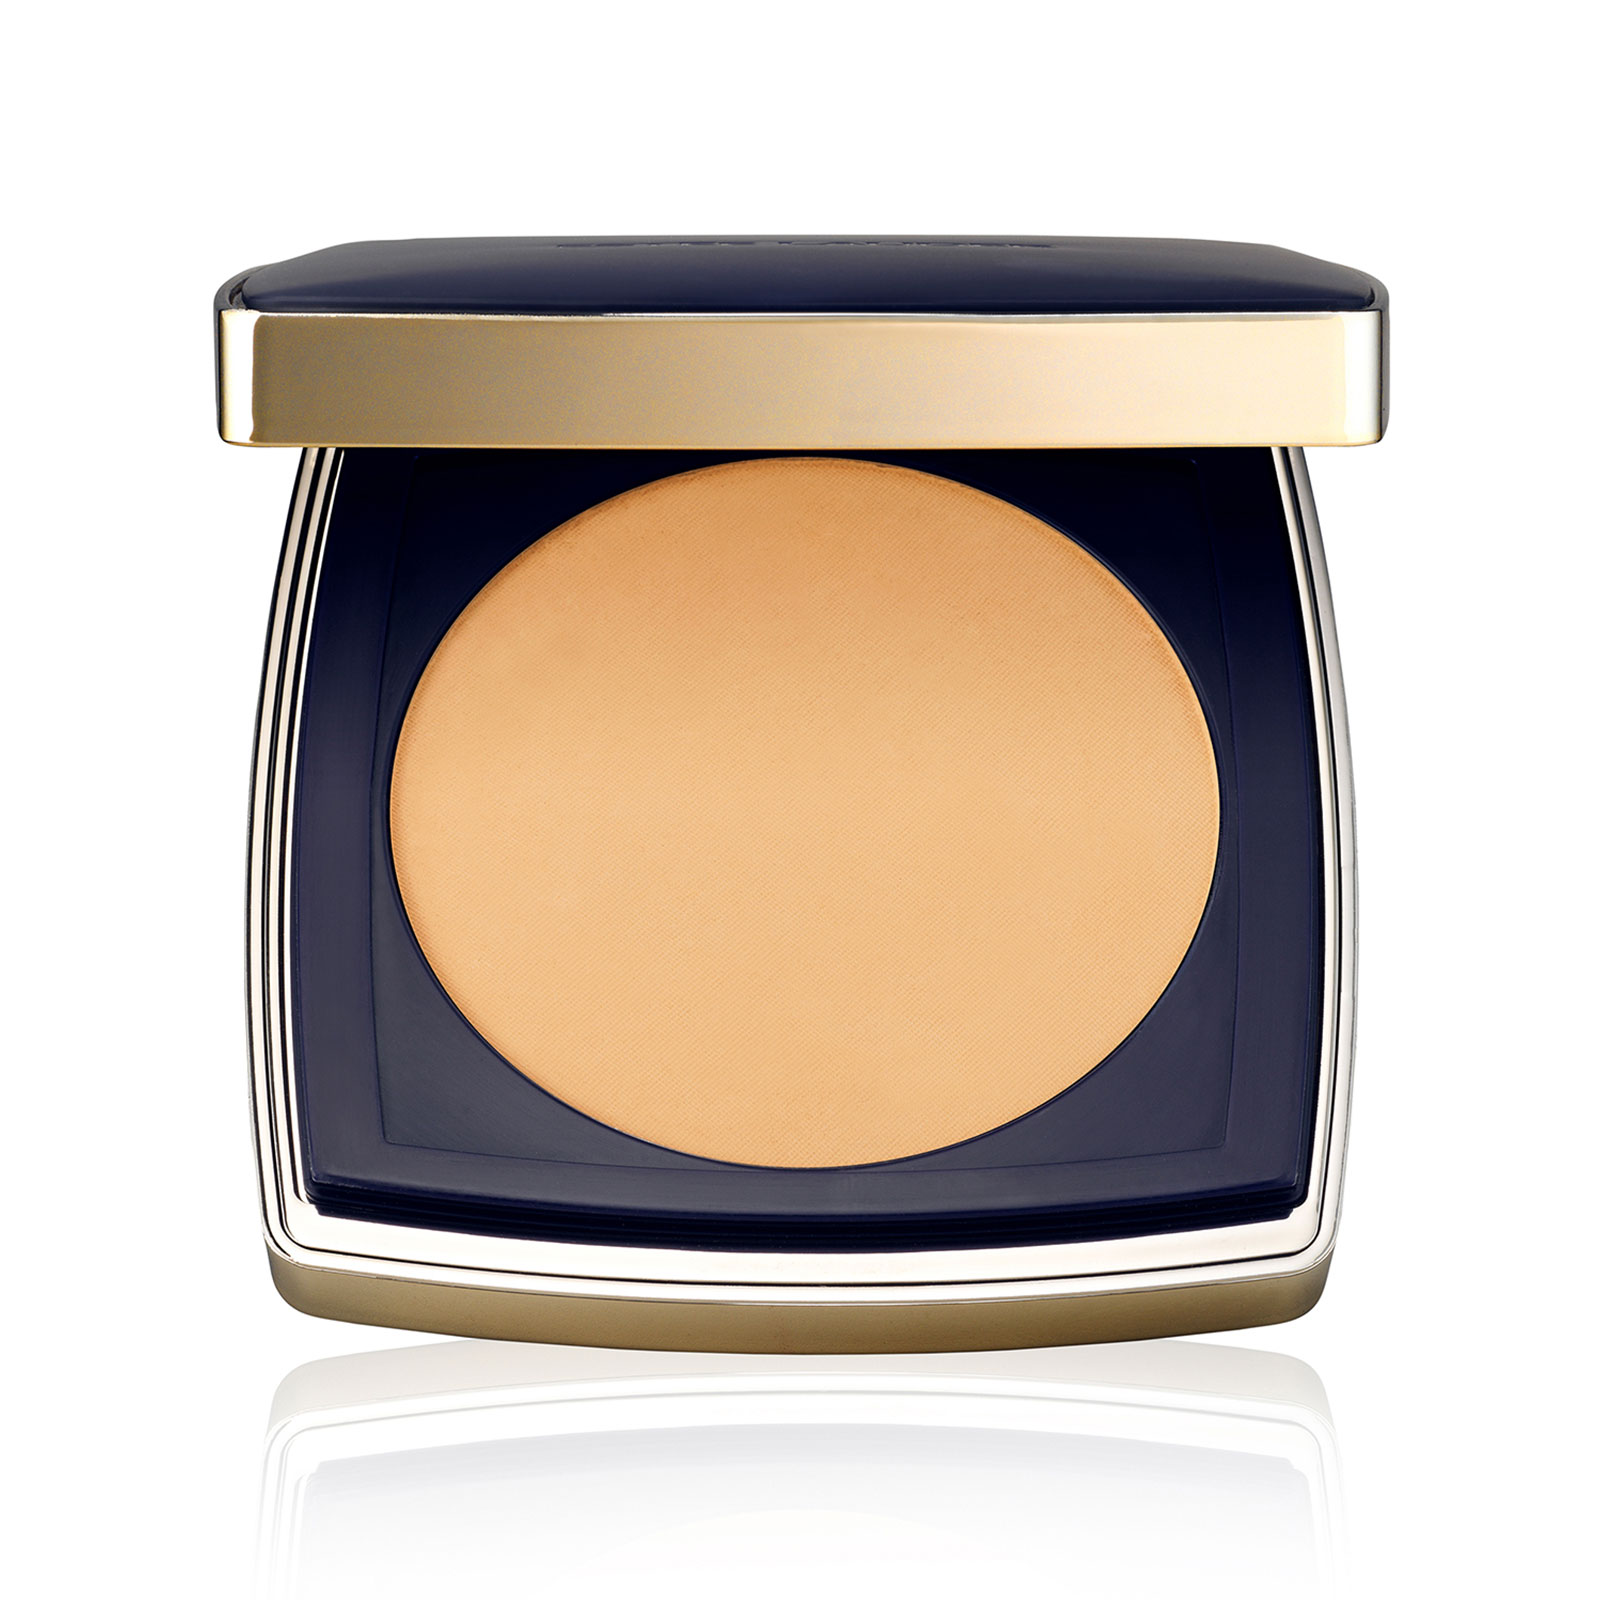 Estee Lauder Double Wear Stay-In-Place Matte Powder Foundation Spf10 12G 4N2 Spiced Sand